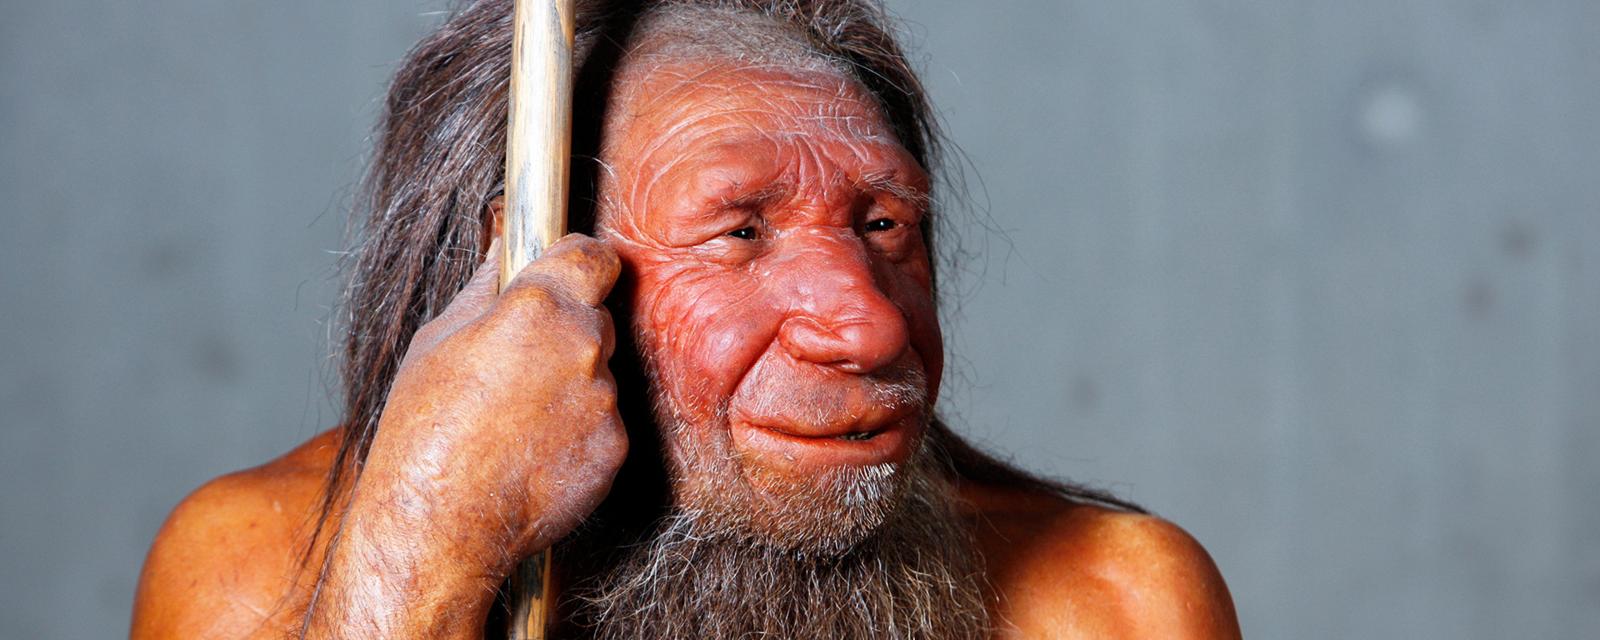 Neanderthals were our close relatives (Credit: Jochen Tack/Alamy Stock Photo)